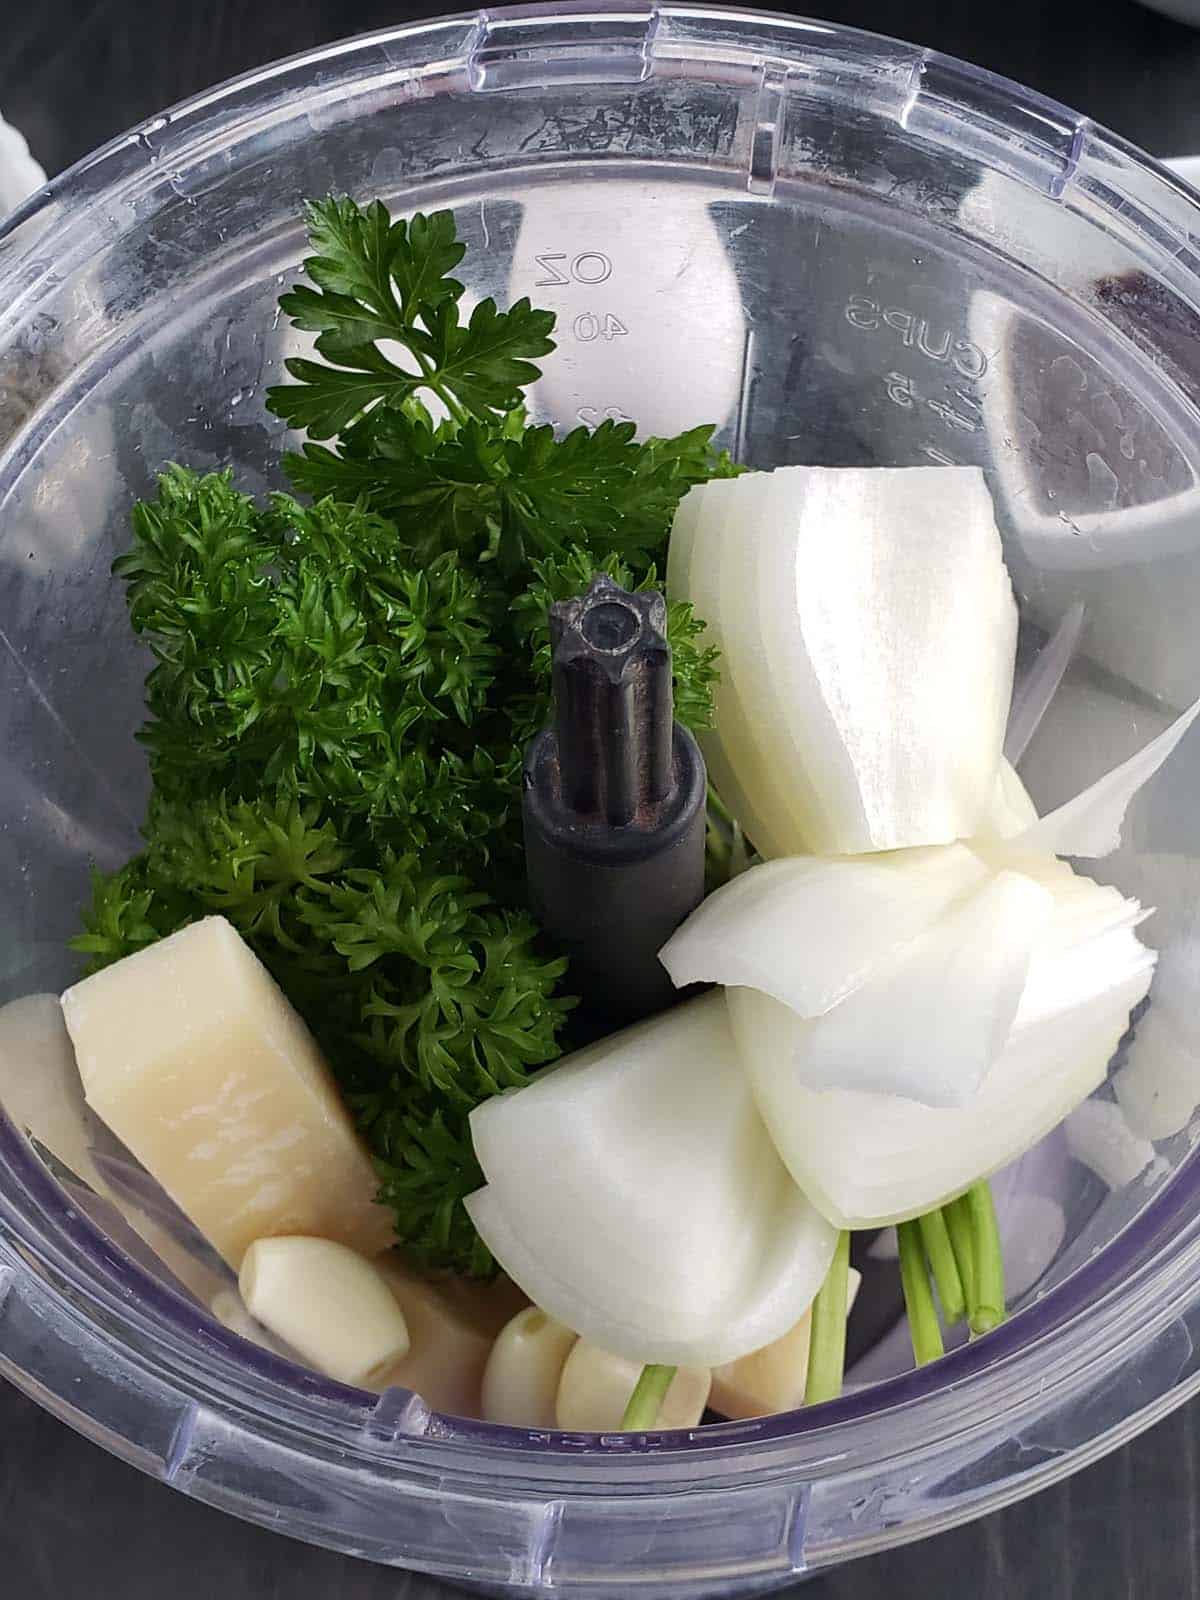 Parsley, onion, parmesan, and garlic in a blender.